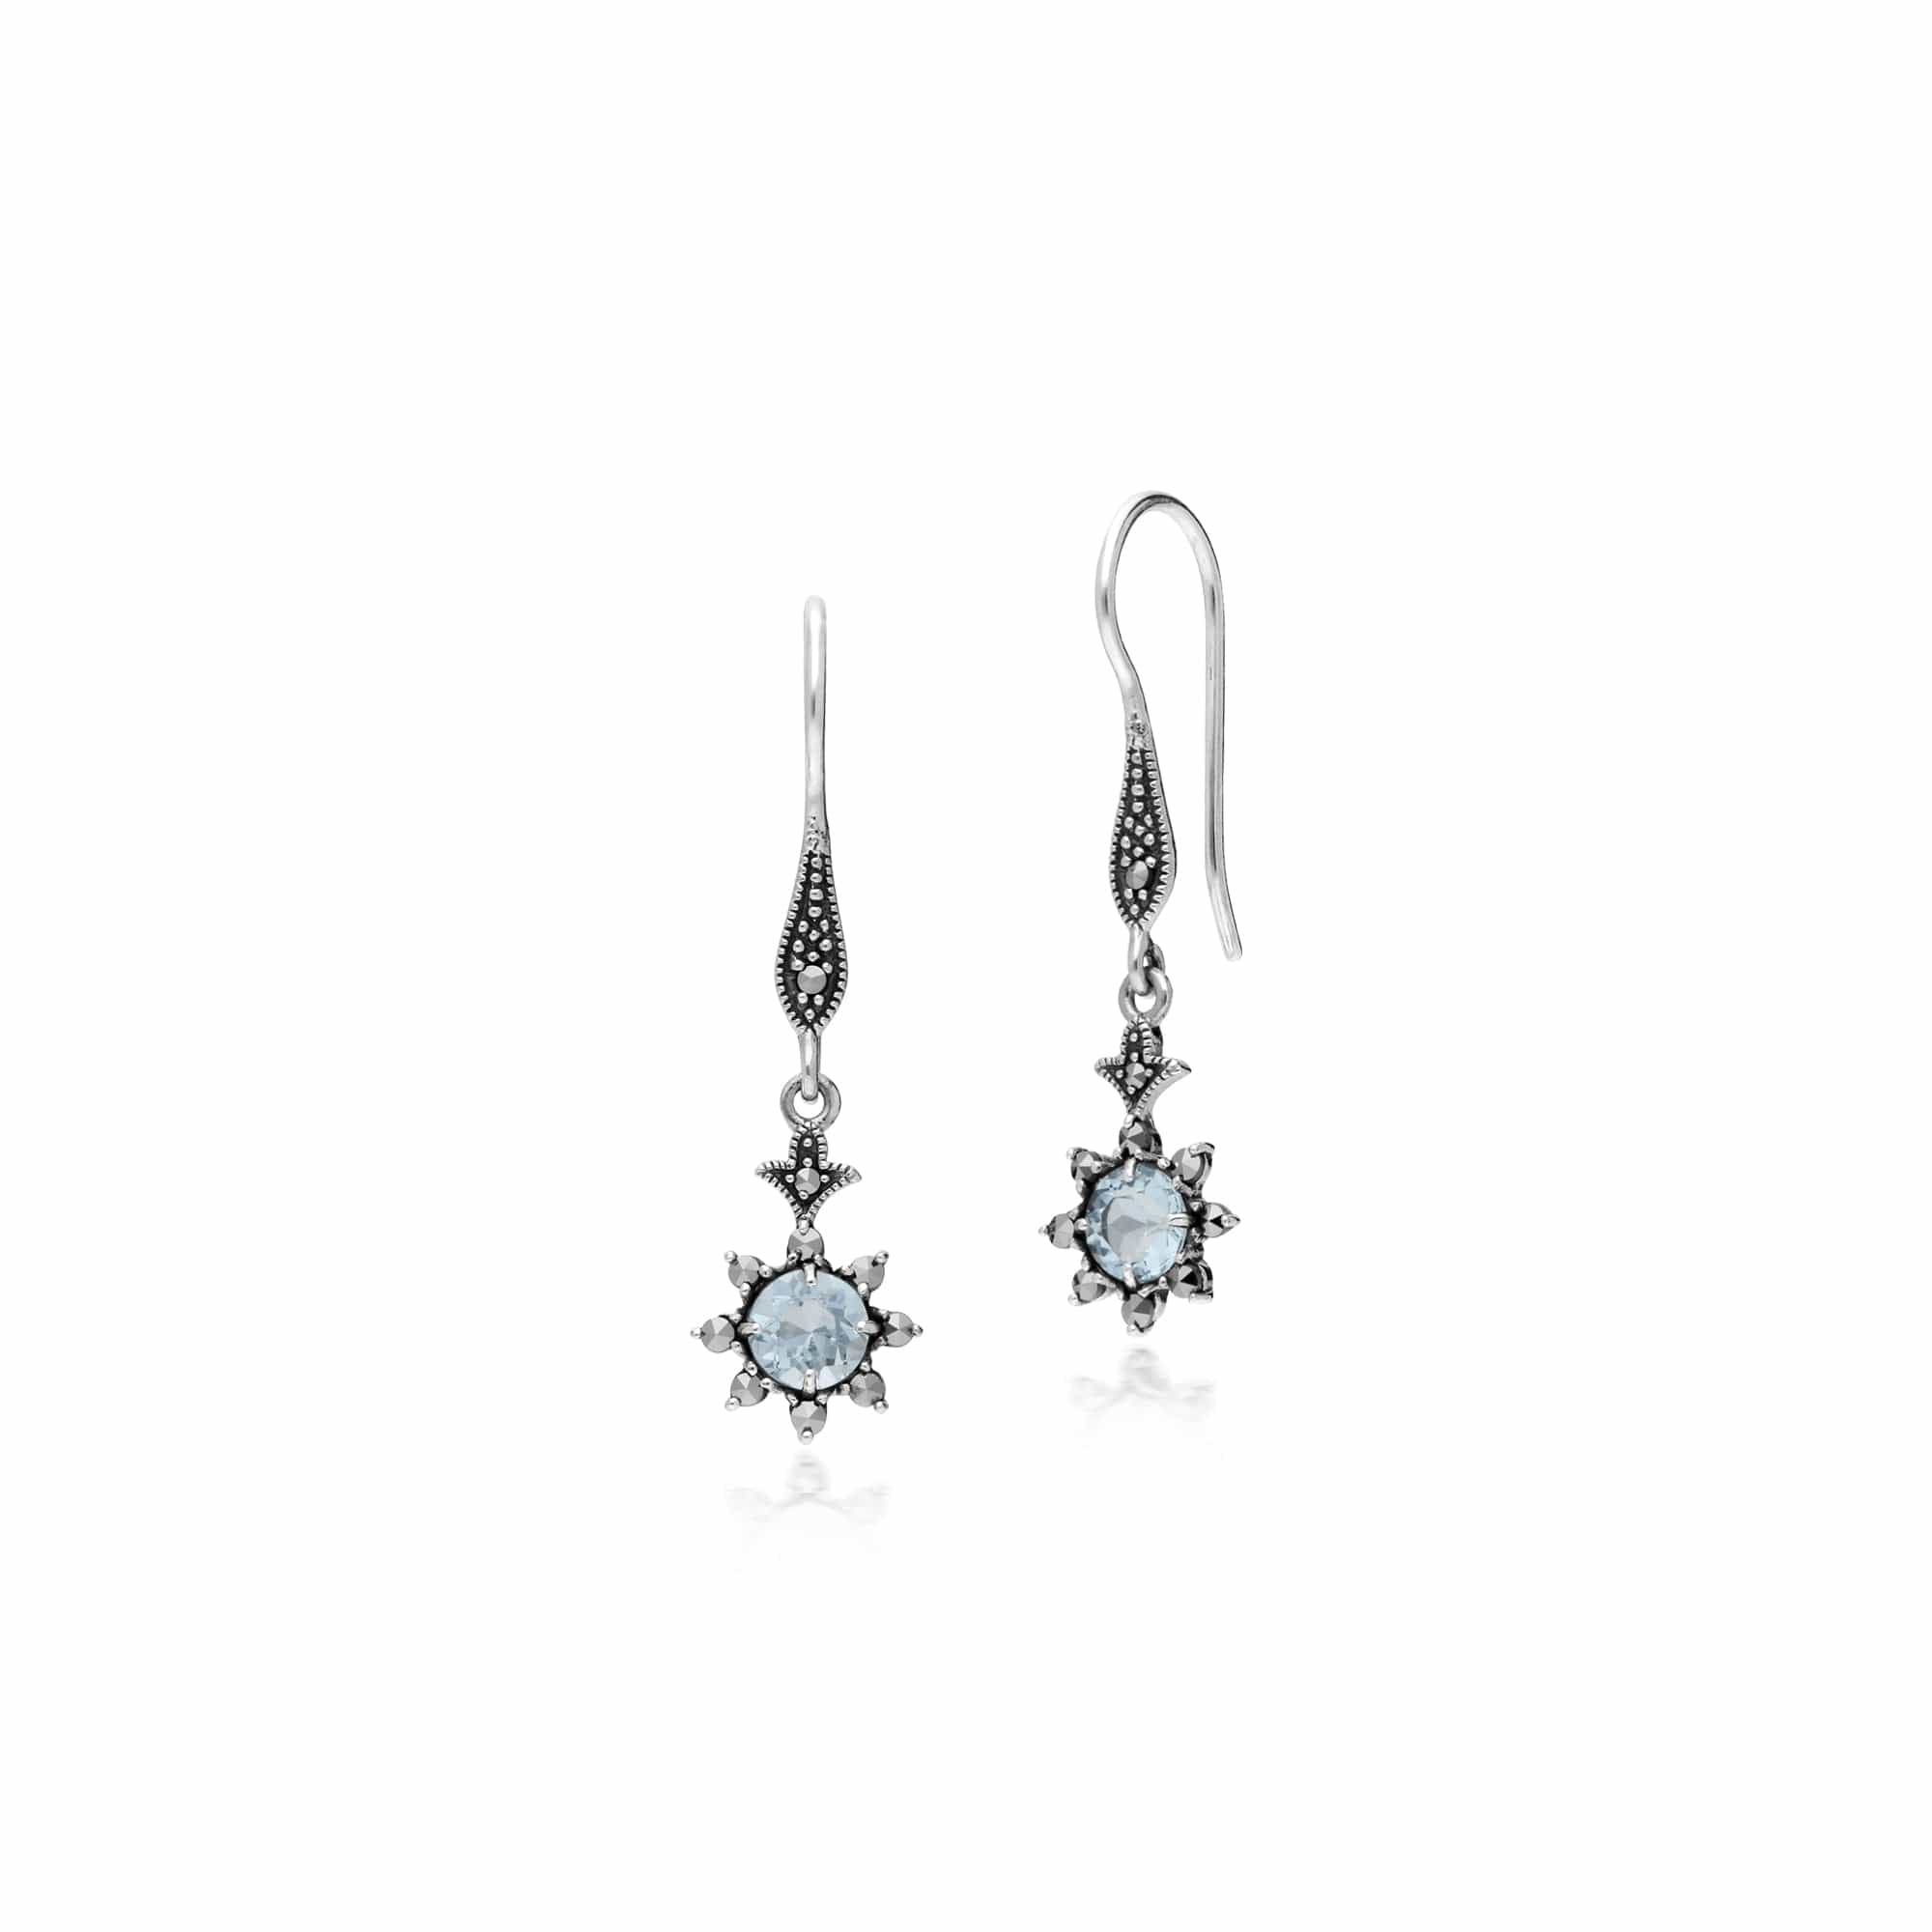 214E860601925 Floral Round Blue Topaz & Marcasite Drop Earrings in 925 Sterling Silver 1